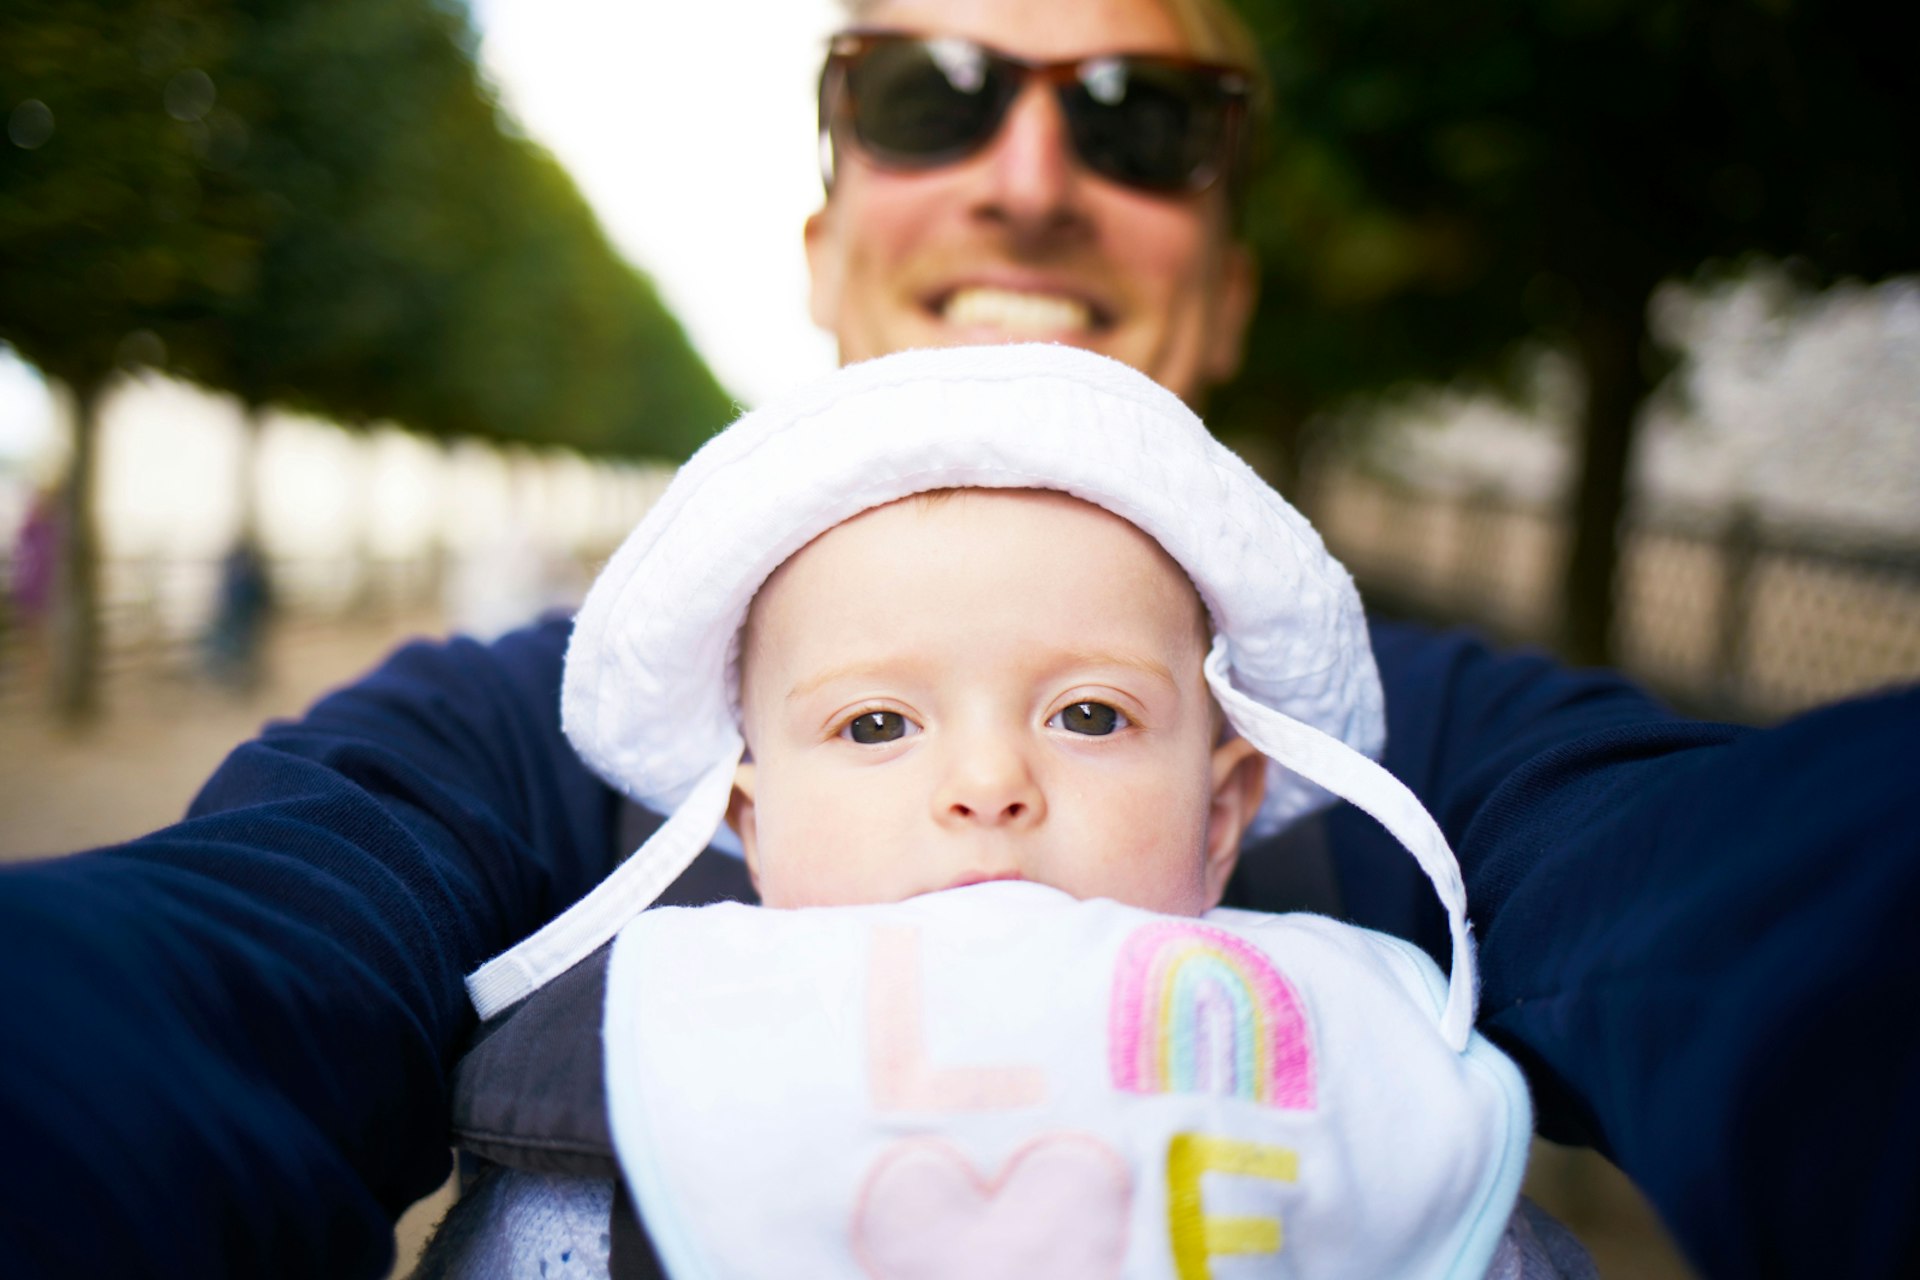 A smiling dad with sunglasses who is slightly blurred stands behind his bewildered looking baby who is looking at the camera from a sling on his chest